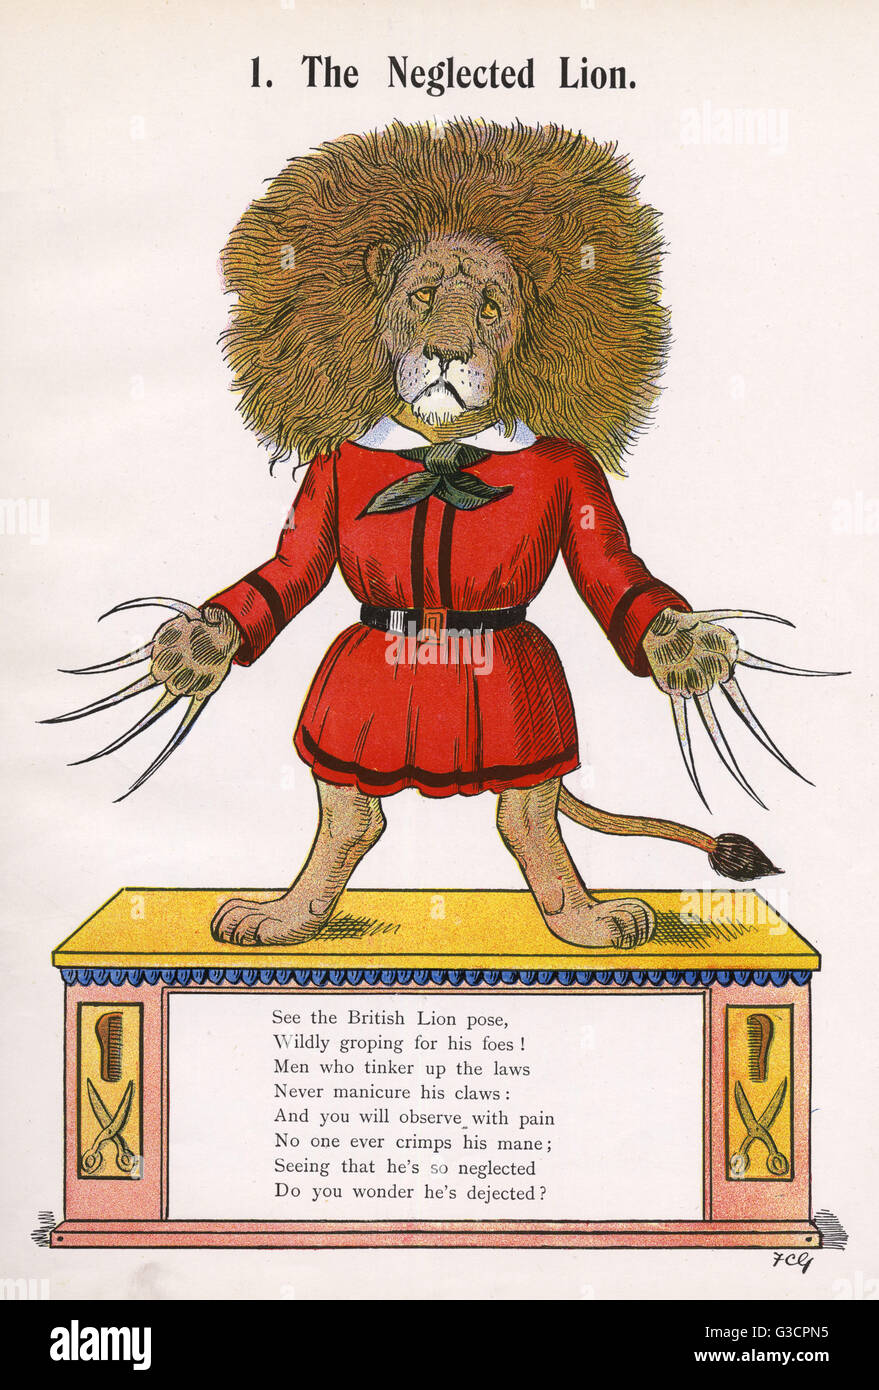 The Neglected Lion. The British Lion as Struwwelpeter. Stock Photo